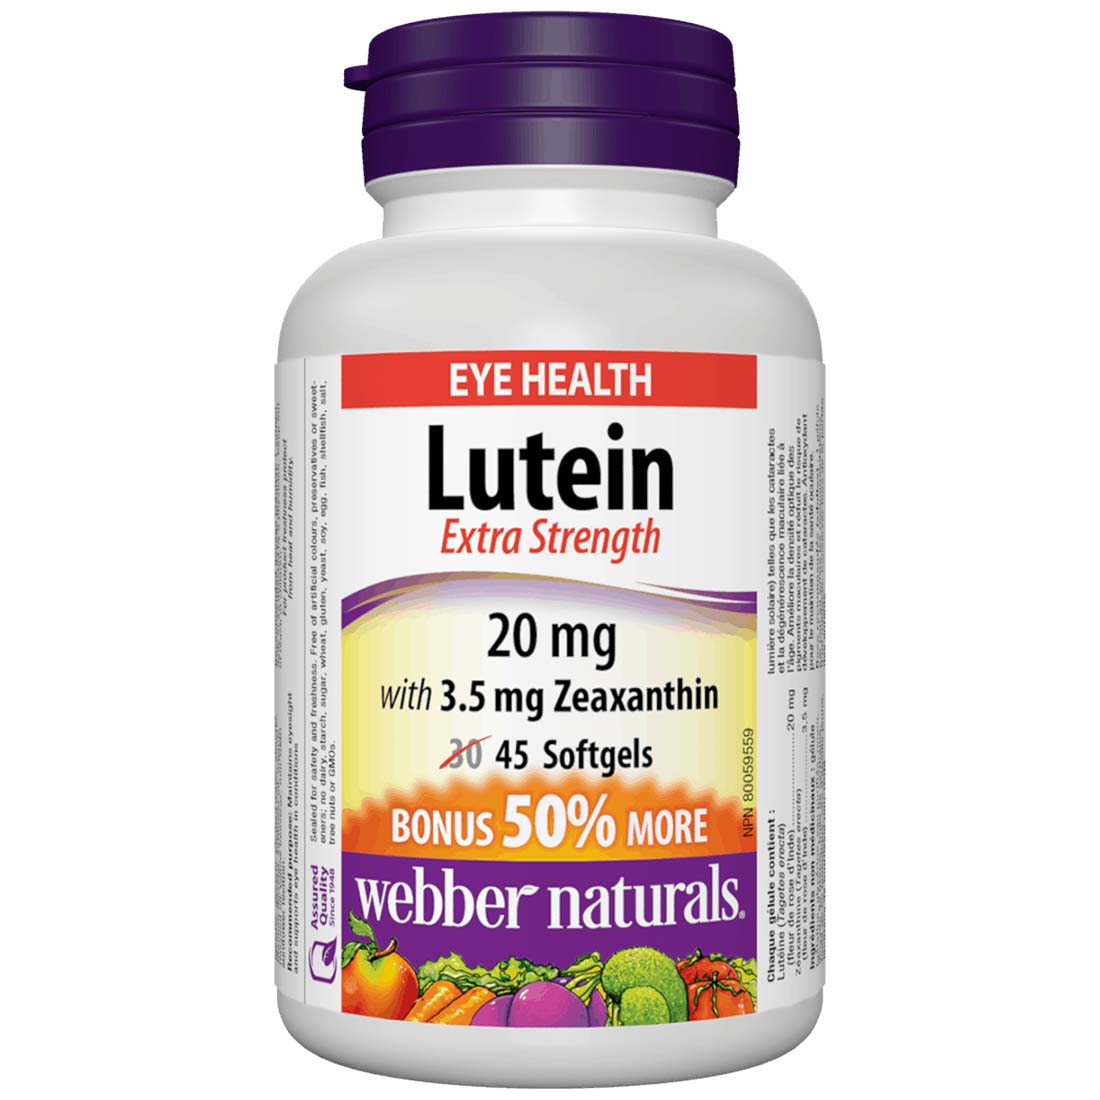 Webber Naturals Lutein 20mg with Zeaxanthin, Extra Strength, BONUS SIZE 50% MORE, 30+15 Softgels